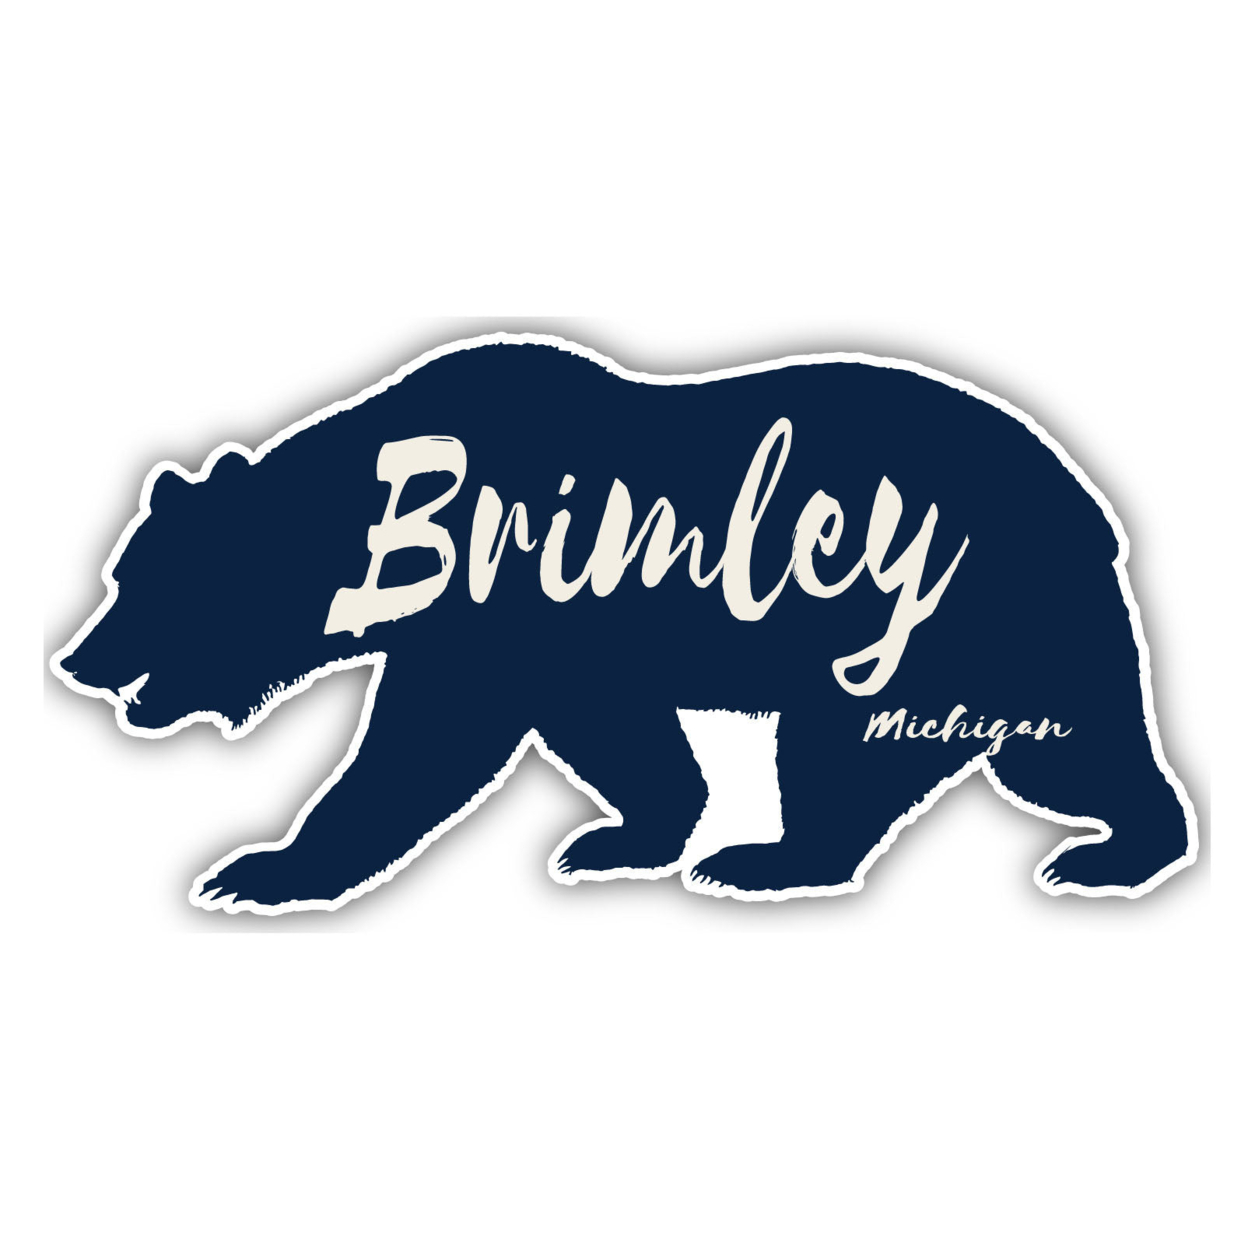 Brimley Michigan Souvenir Decorative Stickers (Choose Theme And Size) - Single Unit, 4-Inch, Great Outdoors